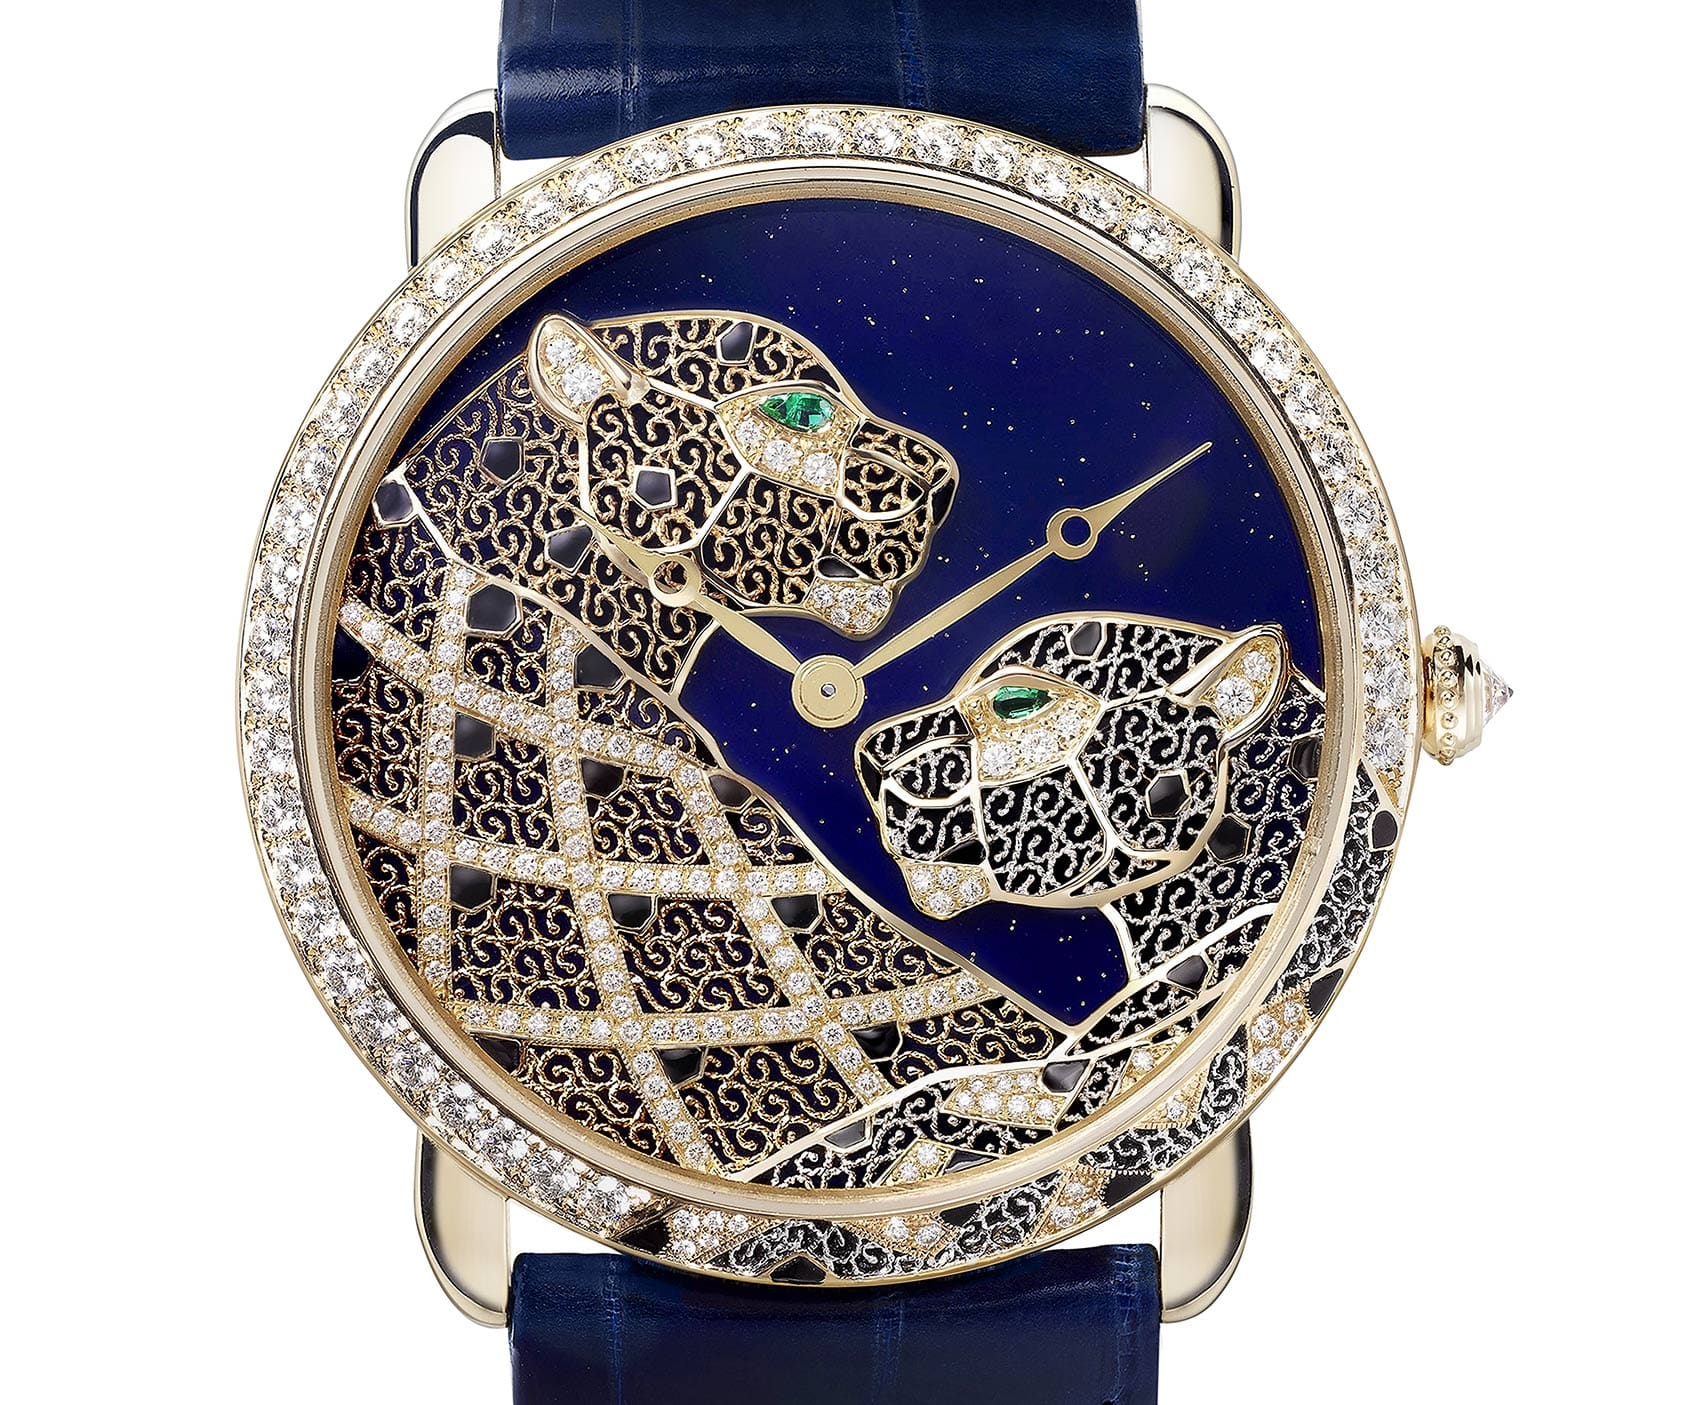 Keeping tradition alive at the Cartier Métiers d’Art